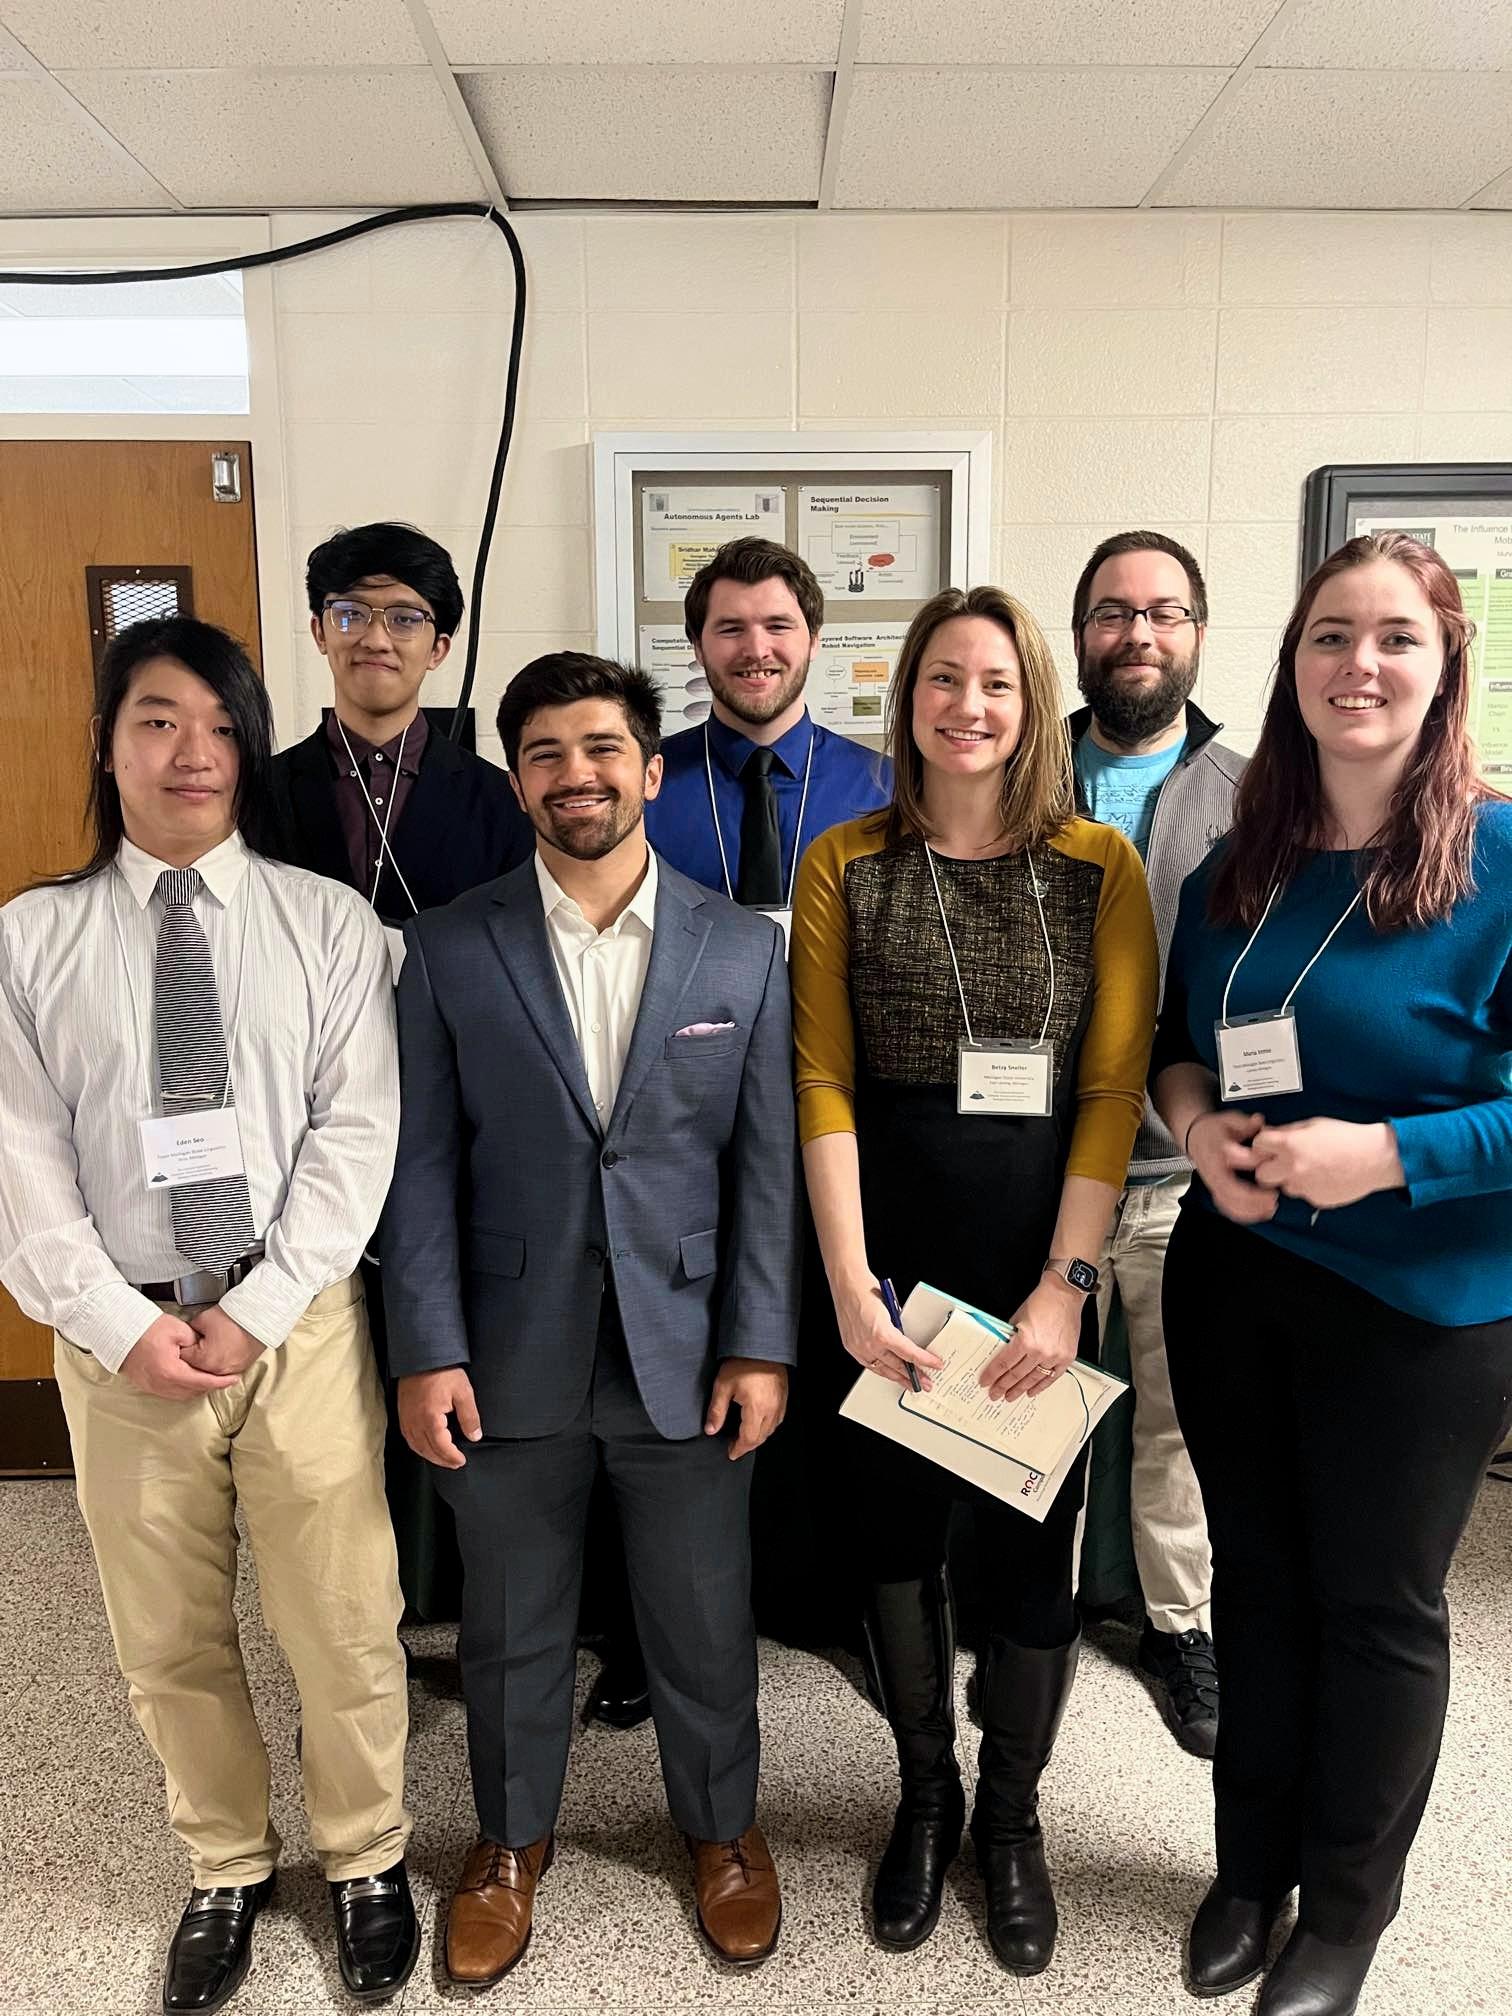 Team MSU Linguistics Wins Exposition Prize at Design Day for their CSE Capstone Experience